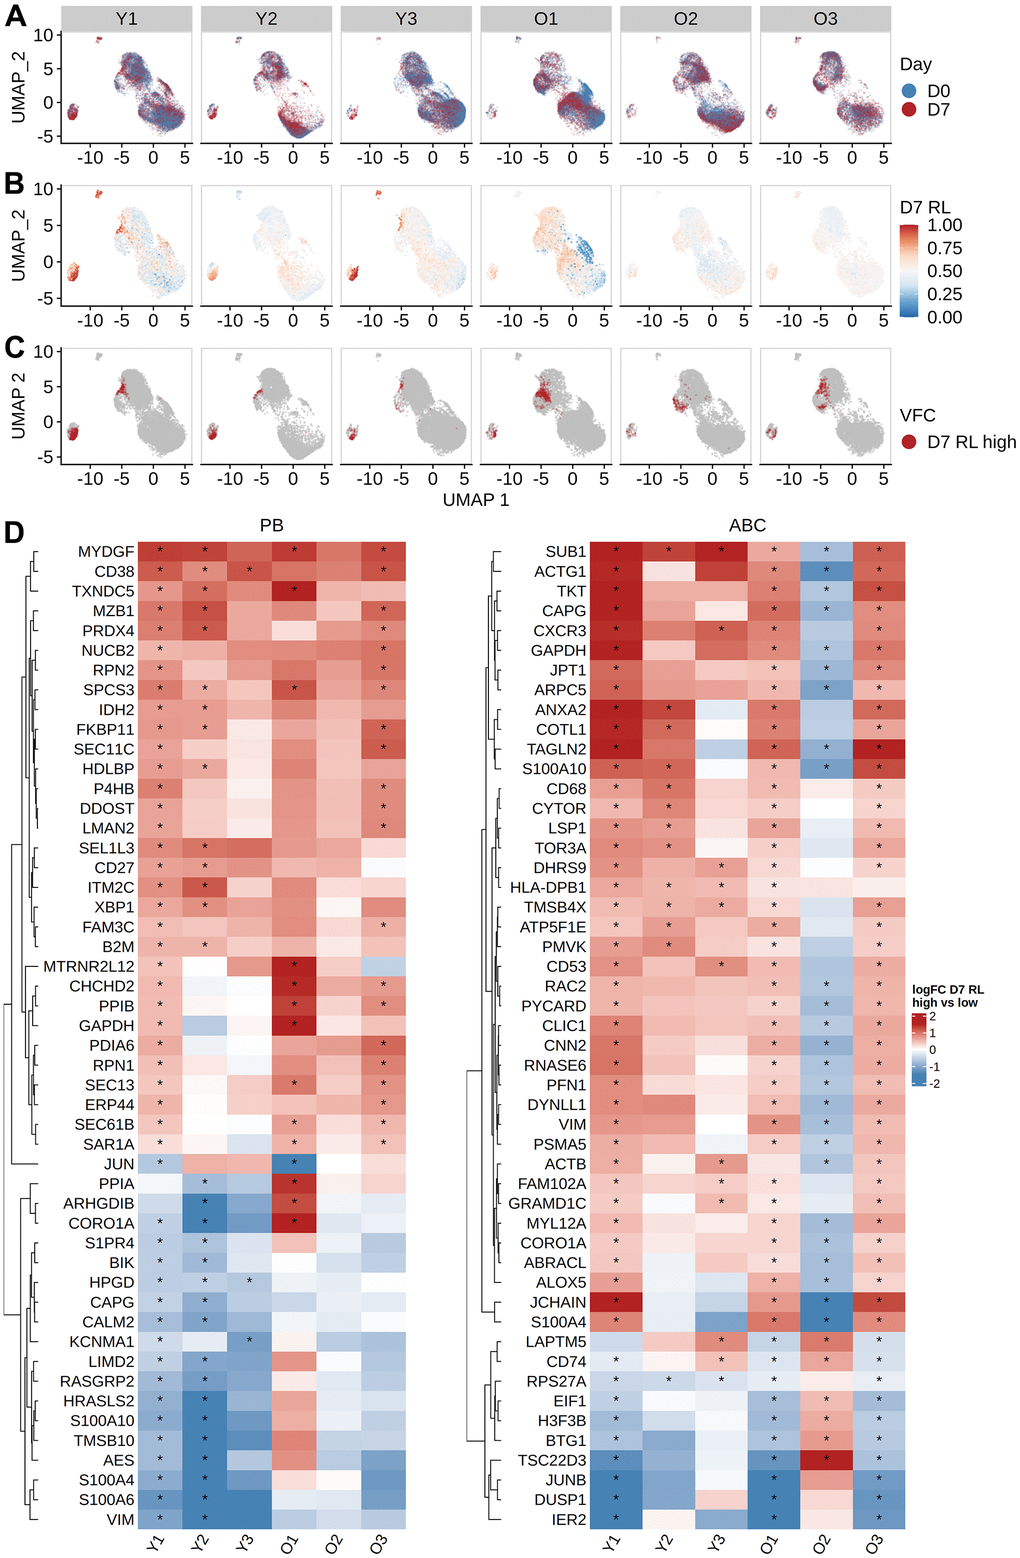 Identifying vaccine-responsive subpopulations within plasmablasts and activated B cells. MELD differential abundance analysis to find cell subpopulations changing abundance between day 0 and day 7. UMAP of gene expression data colored by (A) the day label of the cells, (B) signal filtered by MELD, and (C) the vertex frequency clustering to find subclusters of PB and ABC with differential abundance between day 0 and day 7. (D) Top 50 differentially expressed genes based on average absolute log FC between day 0 and day 7 were shown for each subject. Wilcoxon rank-sum test was used to select differentially expressed genes by comparing high MELD score (day 7-like) and low MELD score (day 0-like) clusters for each subject (FDR-adjusted p-value 